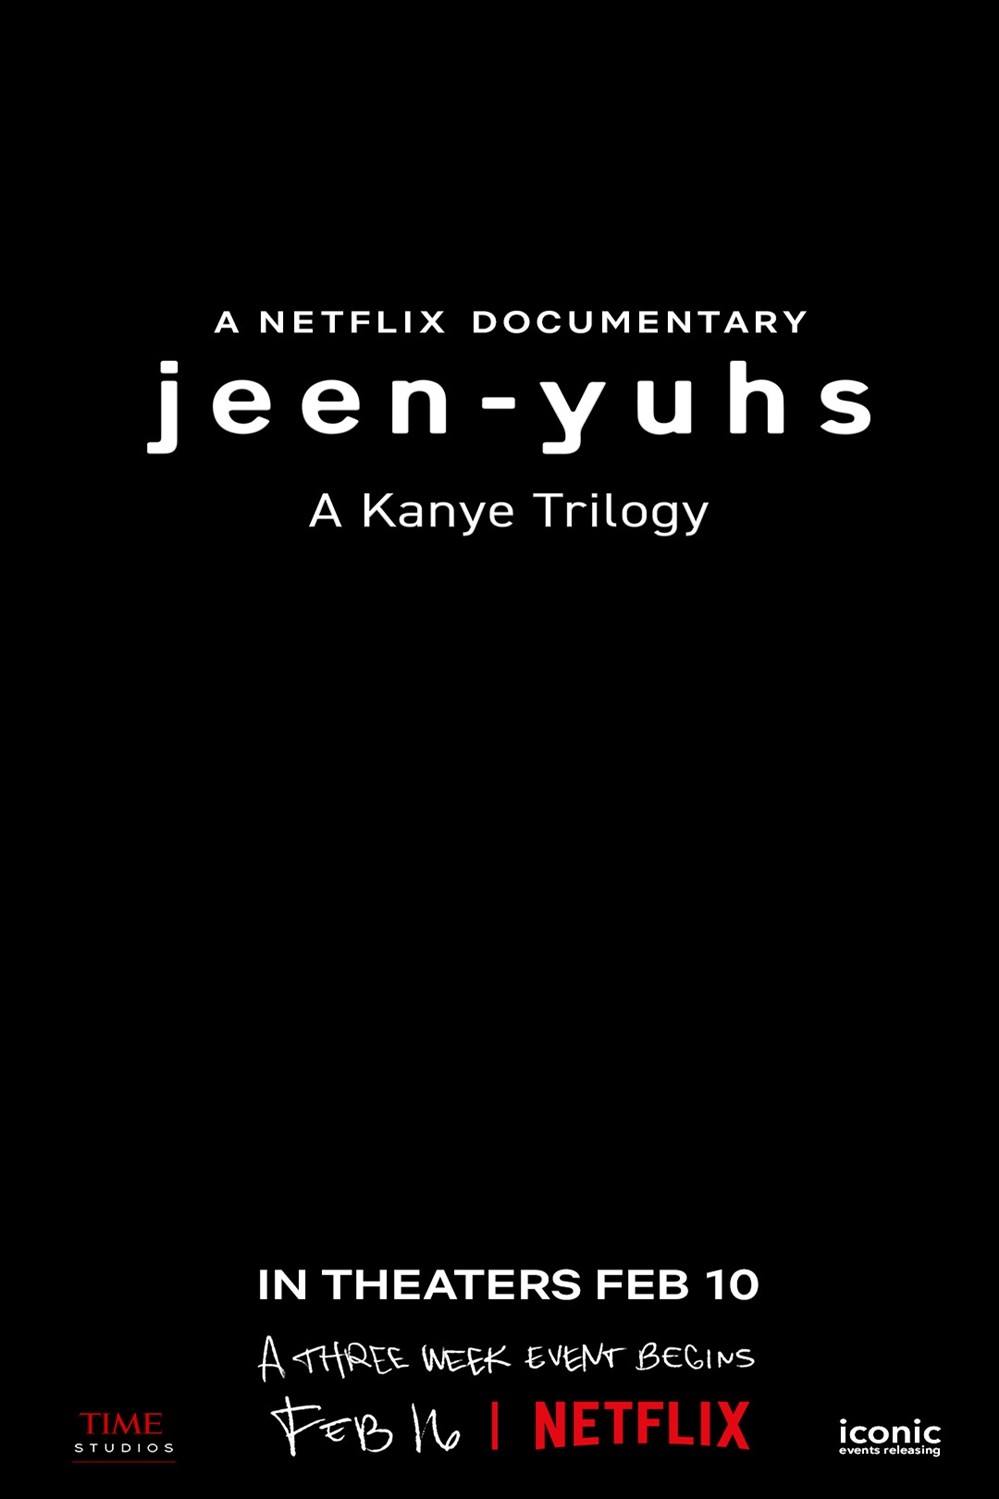 Poster of jeen-yuhs: A Kanye Trilogy (2022)